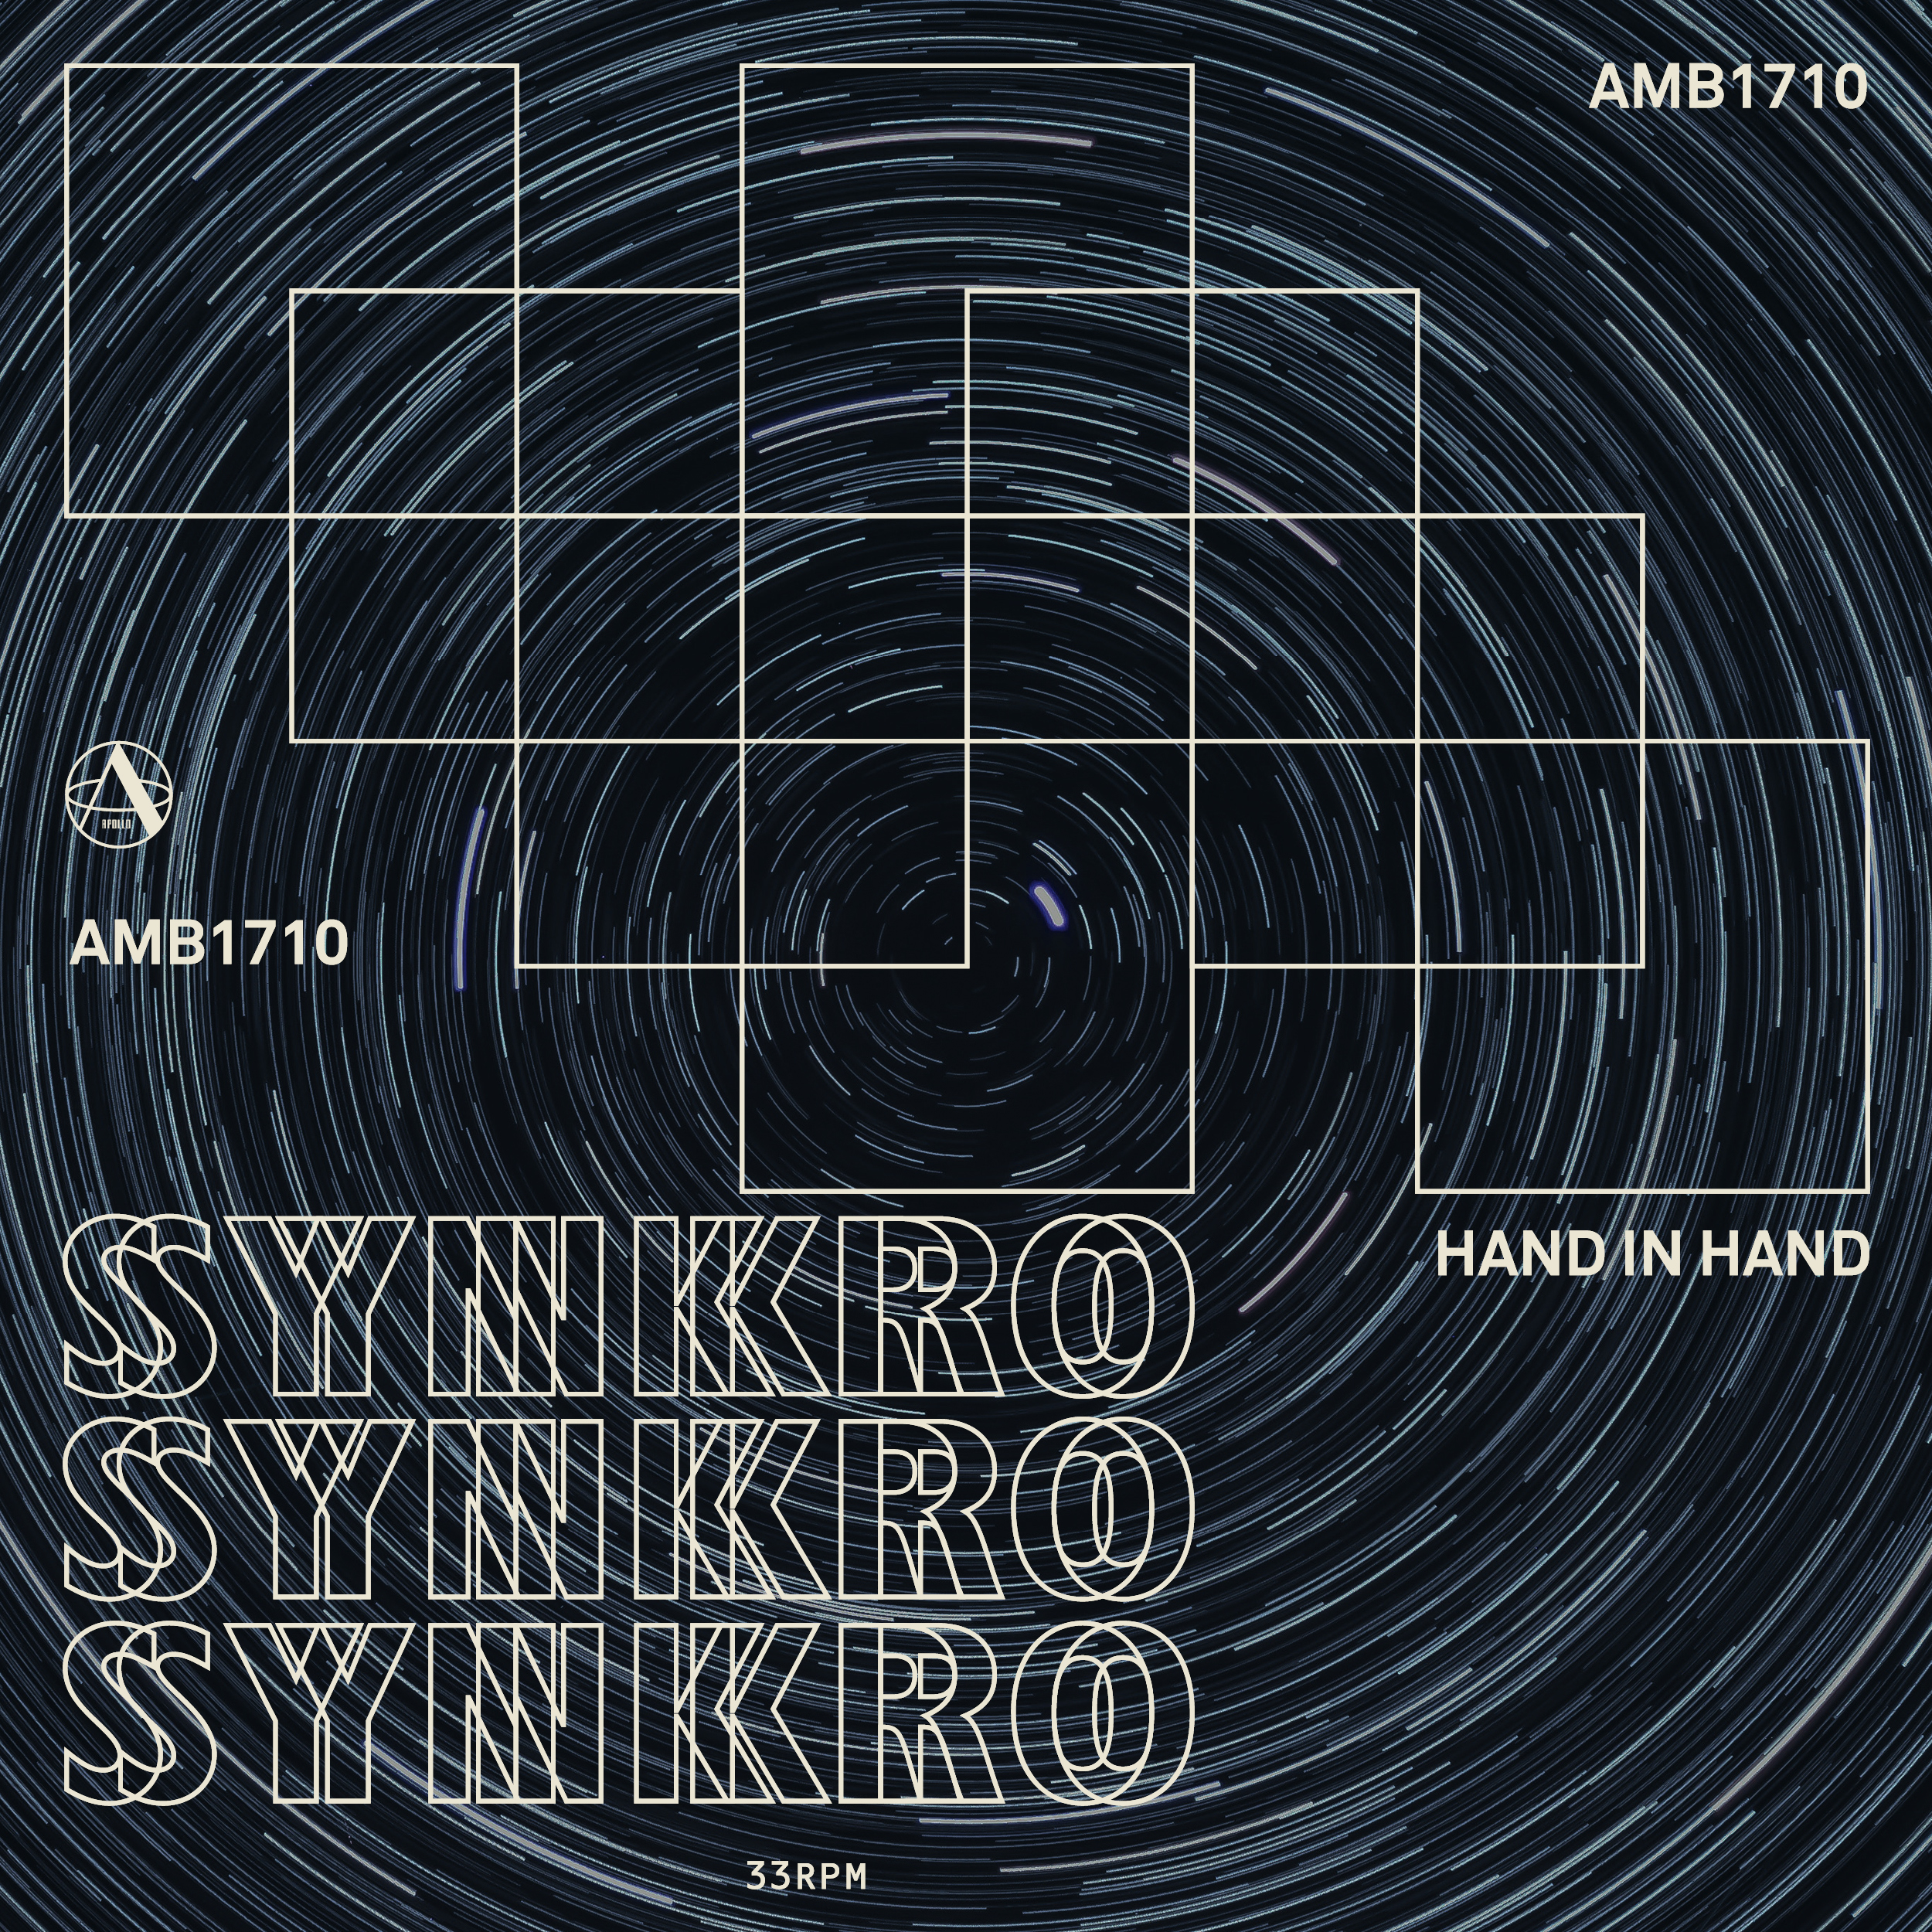 Synkro/HAND IN HAND 12"